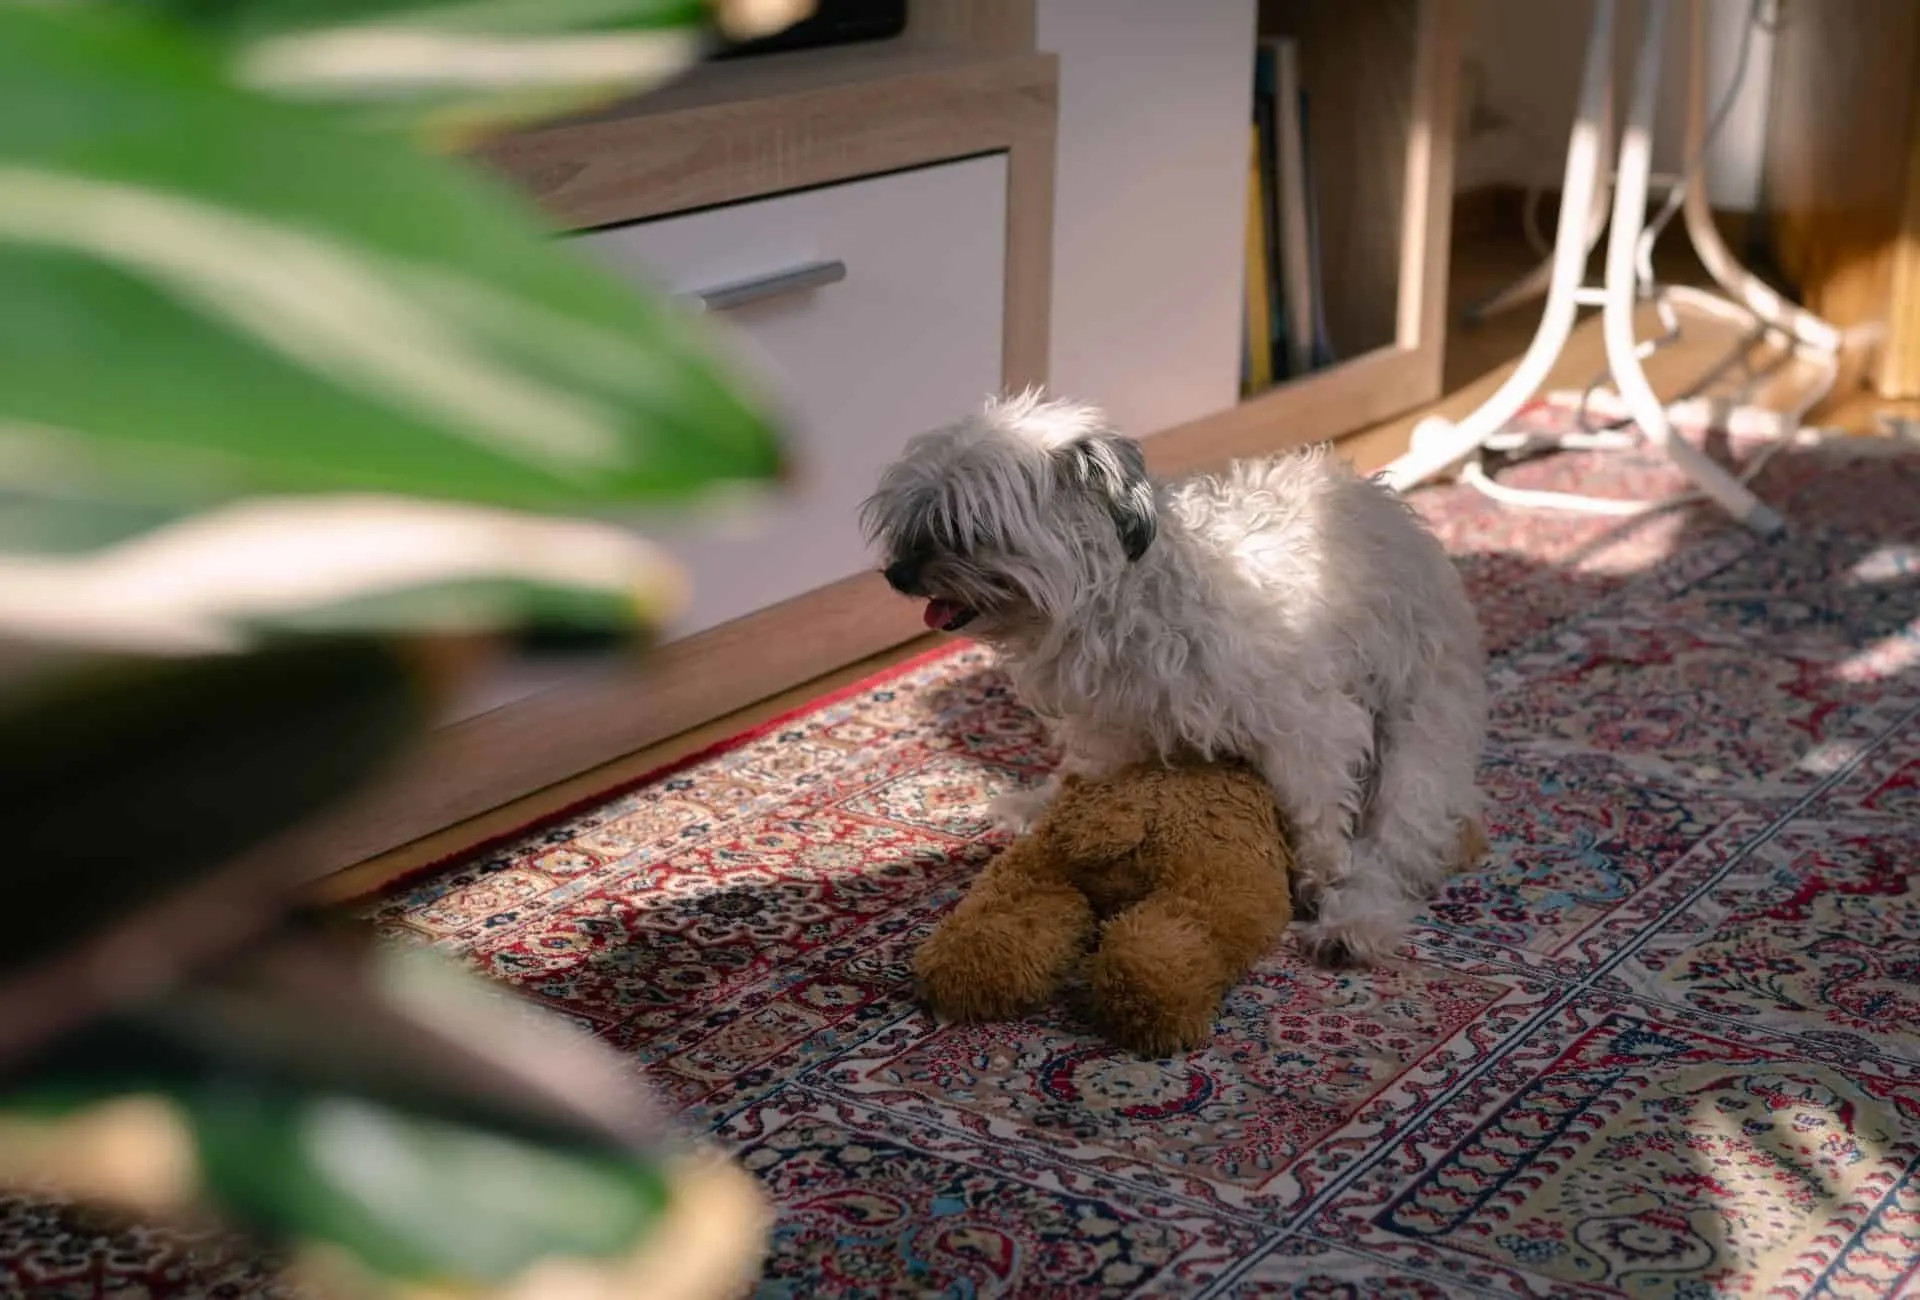 Small dog humps its teddy bear toy on the room floor.